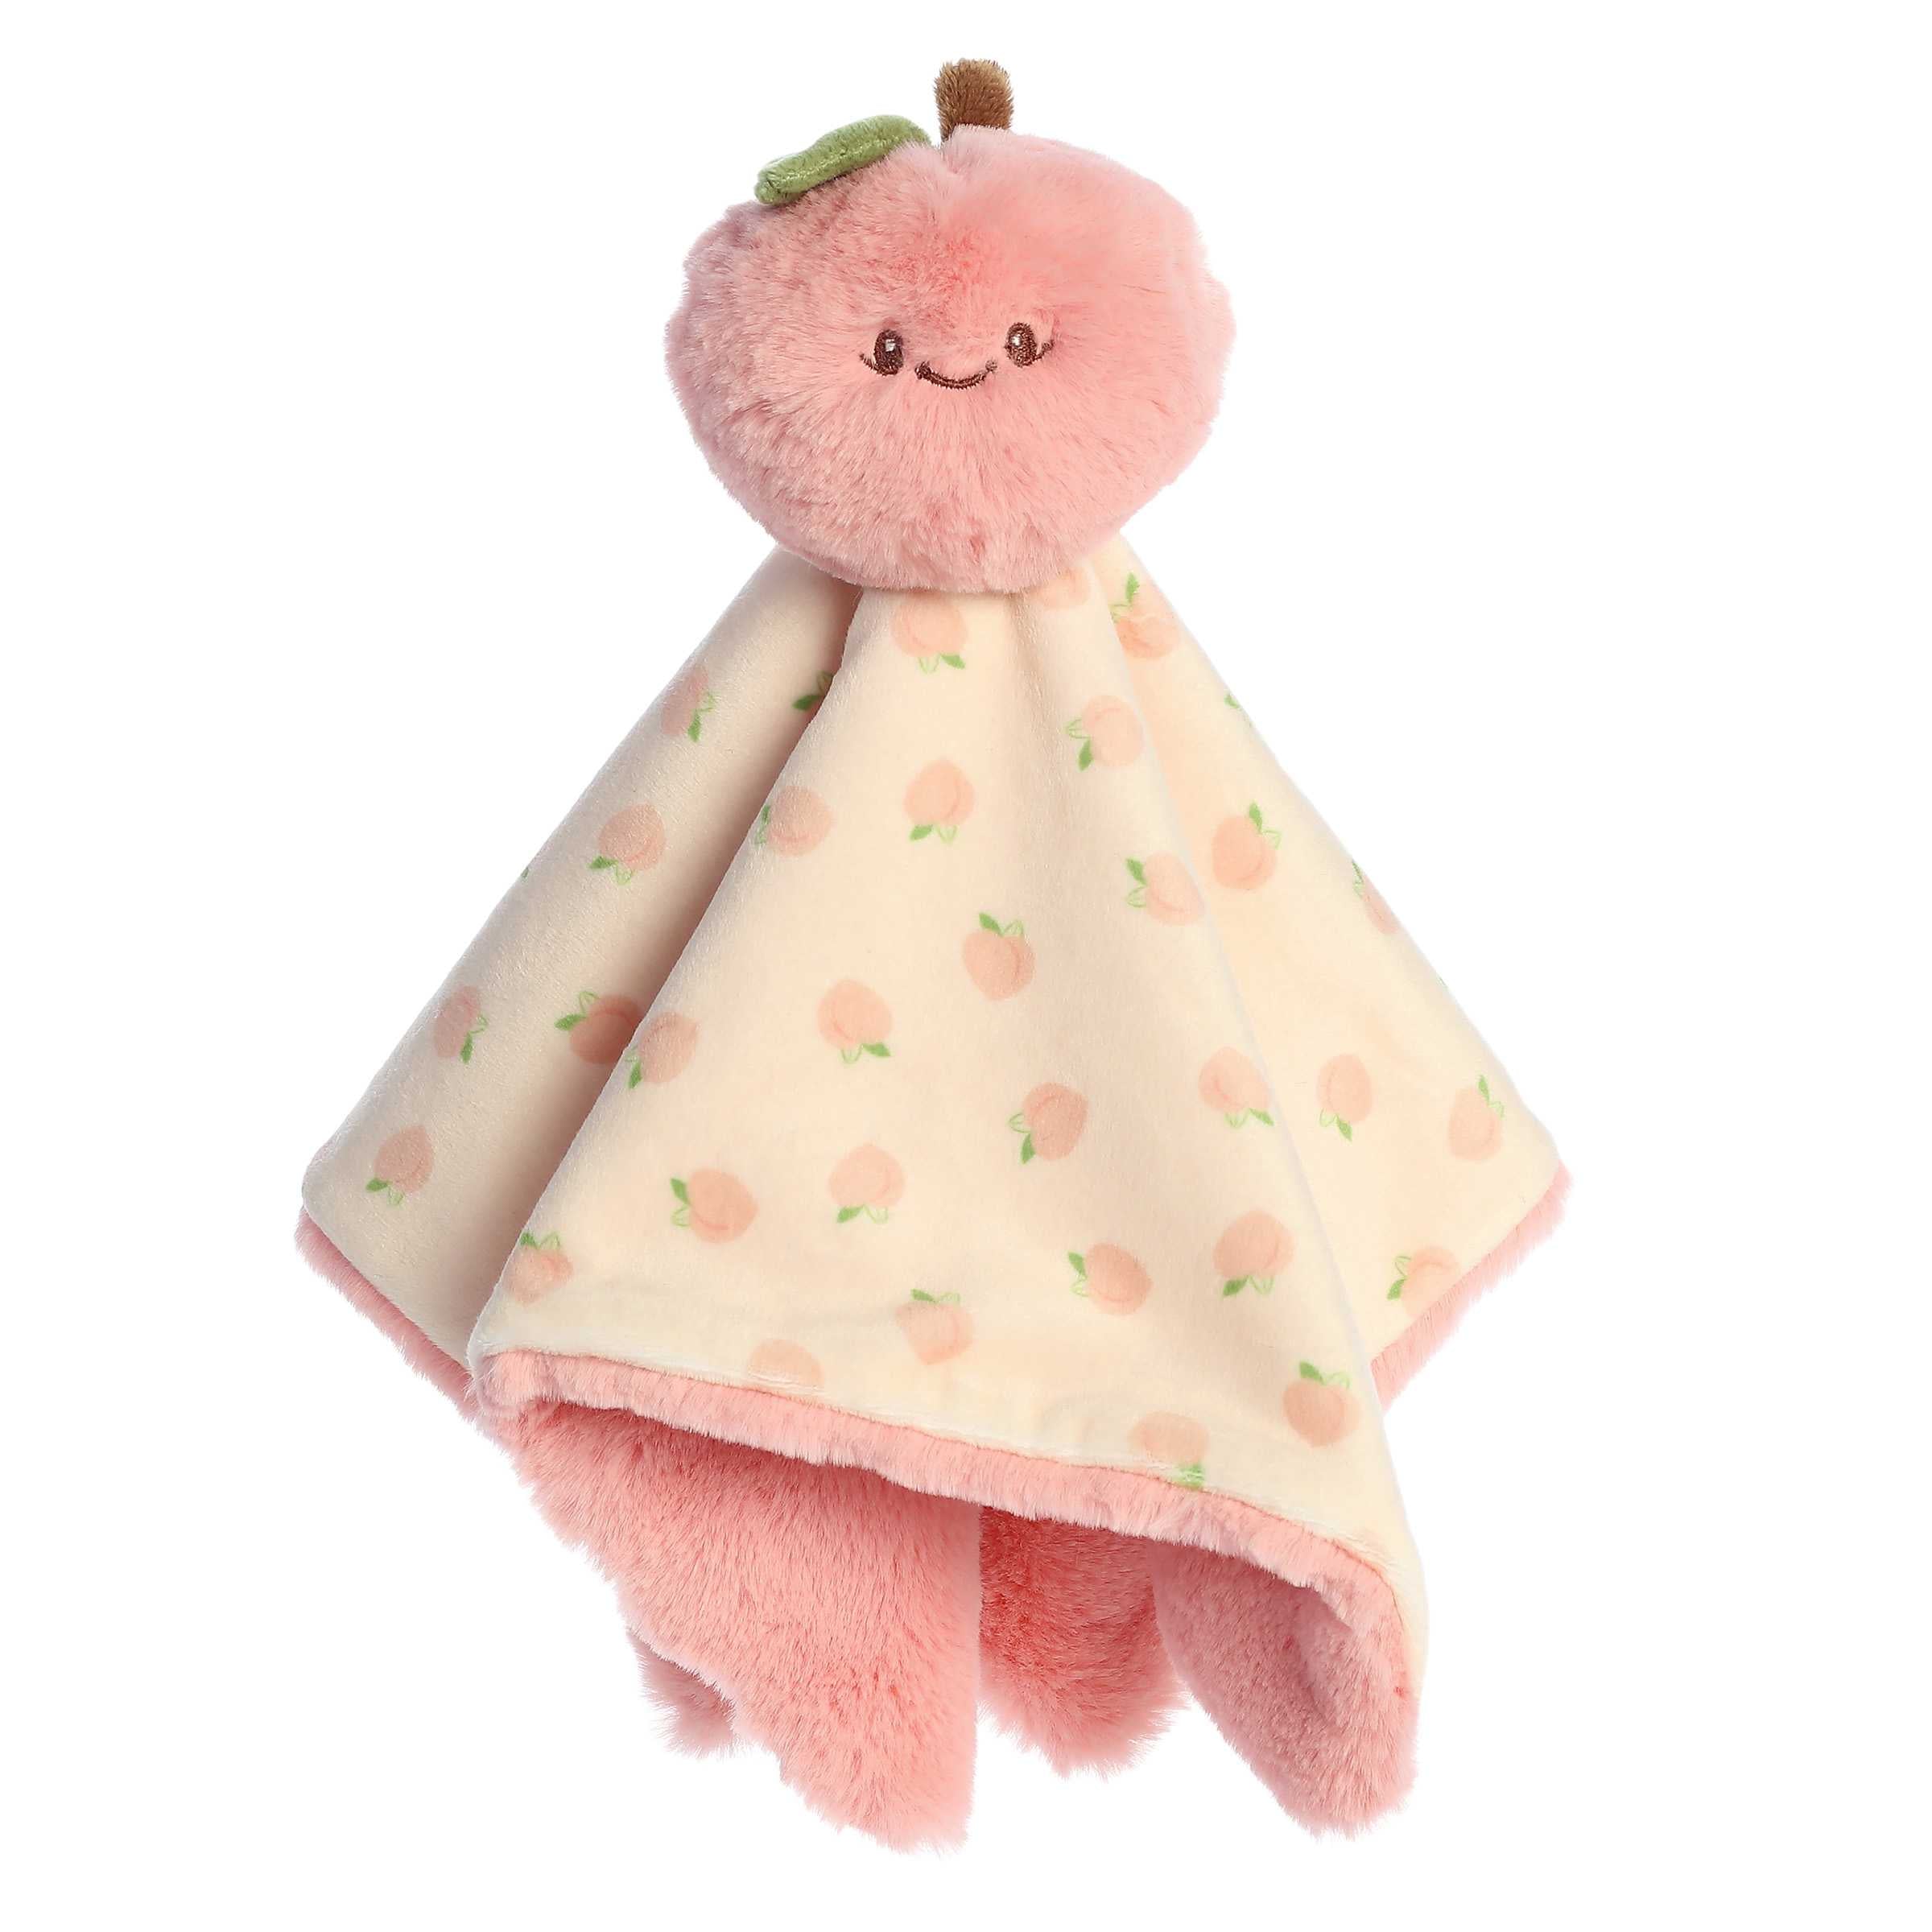 Cuddly Peach Plush with a pink round body and attached cozy baby blanket with fruit design and soft pink fur on the back